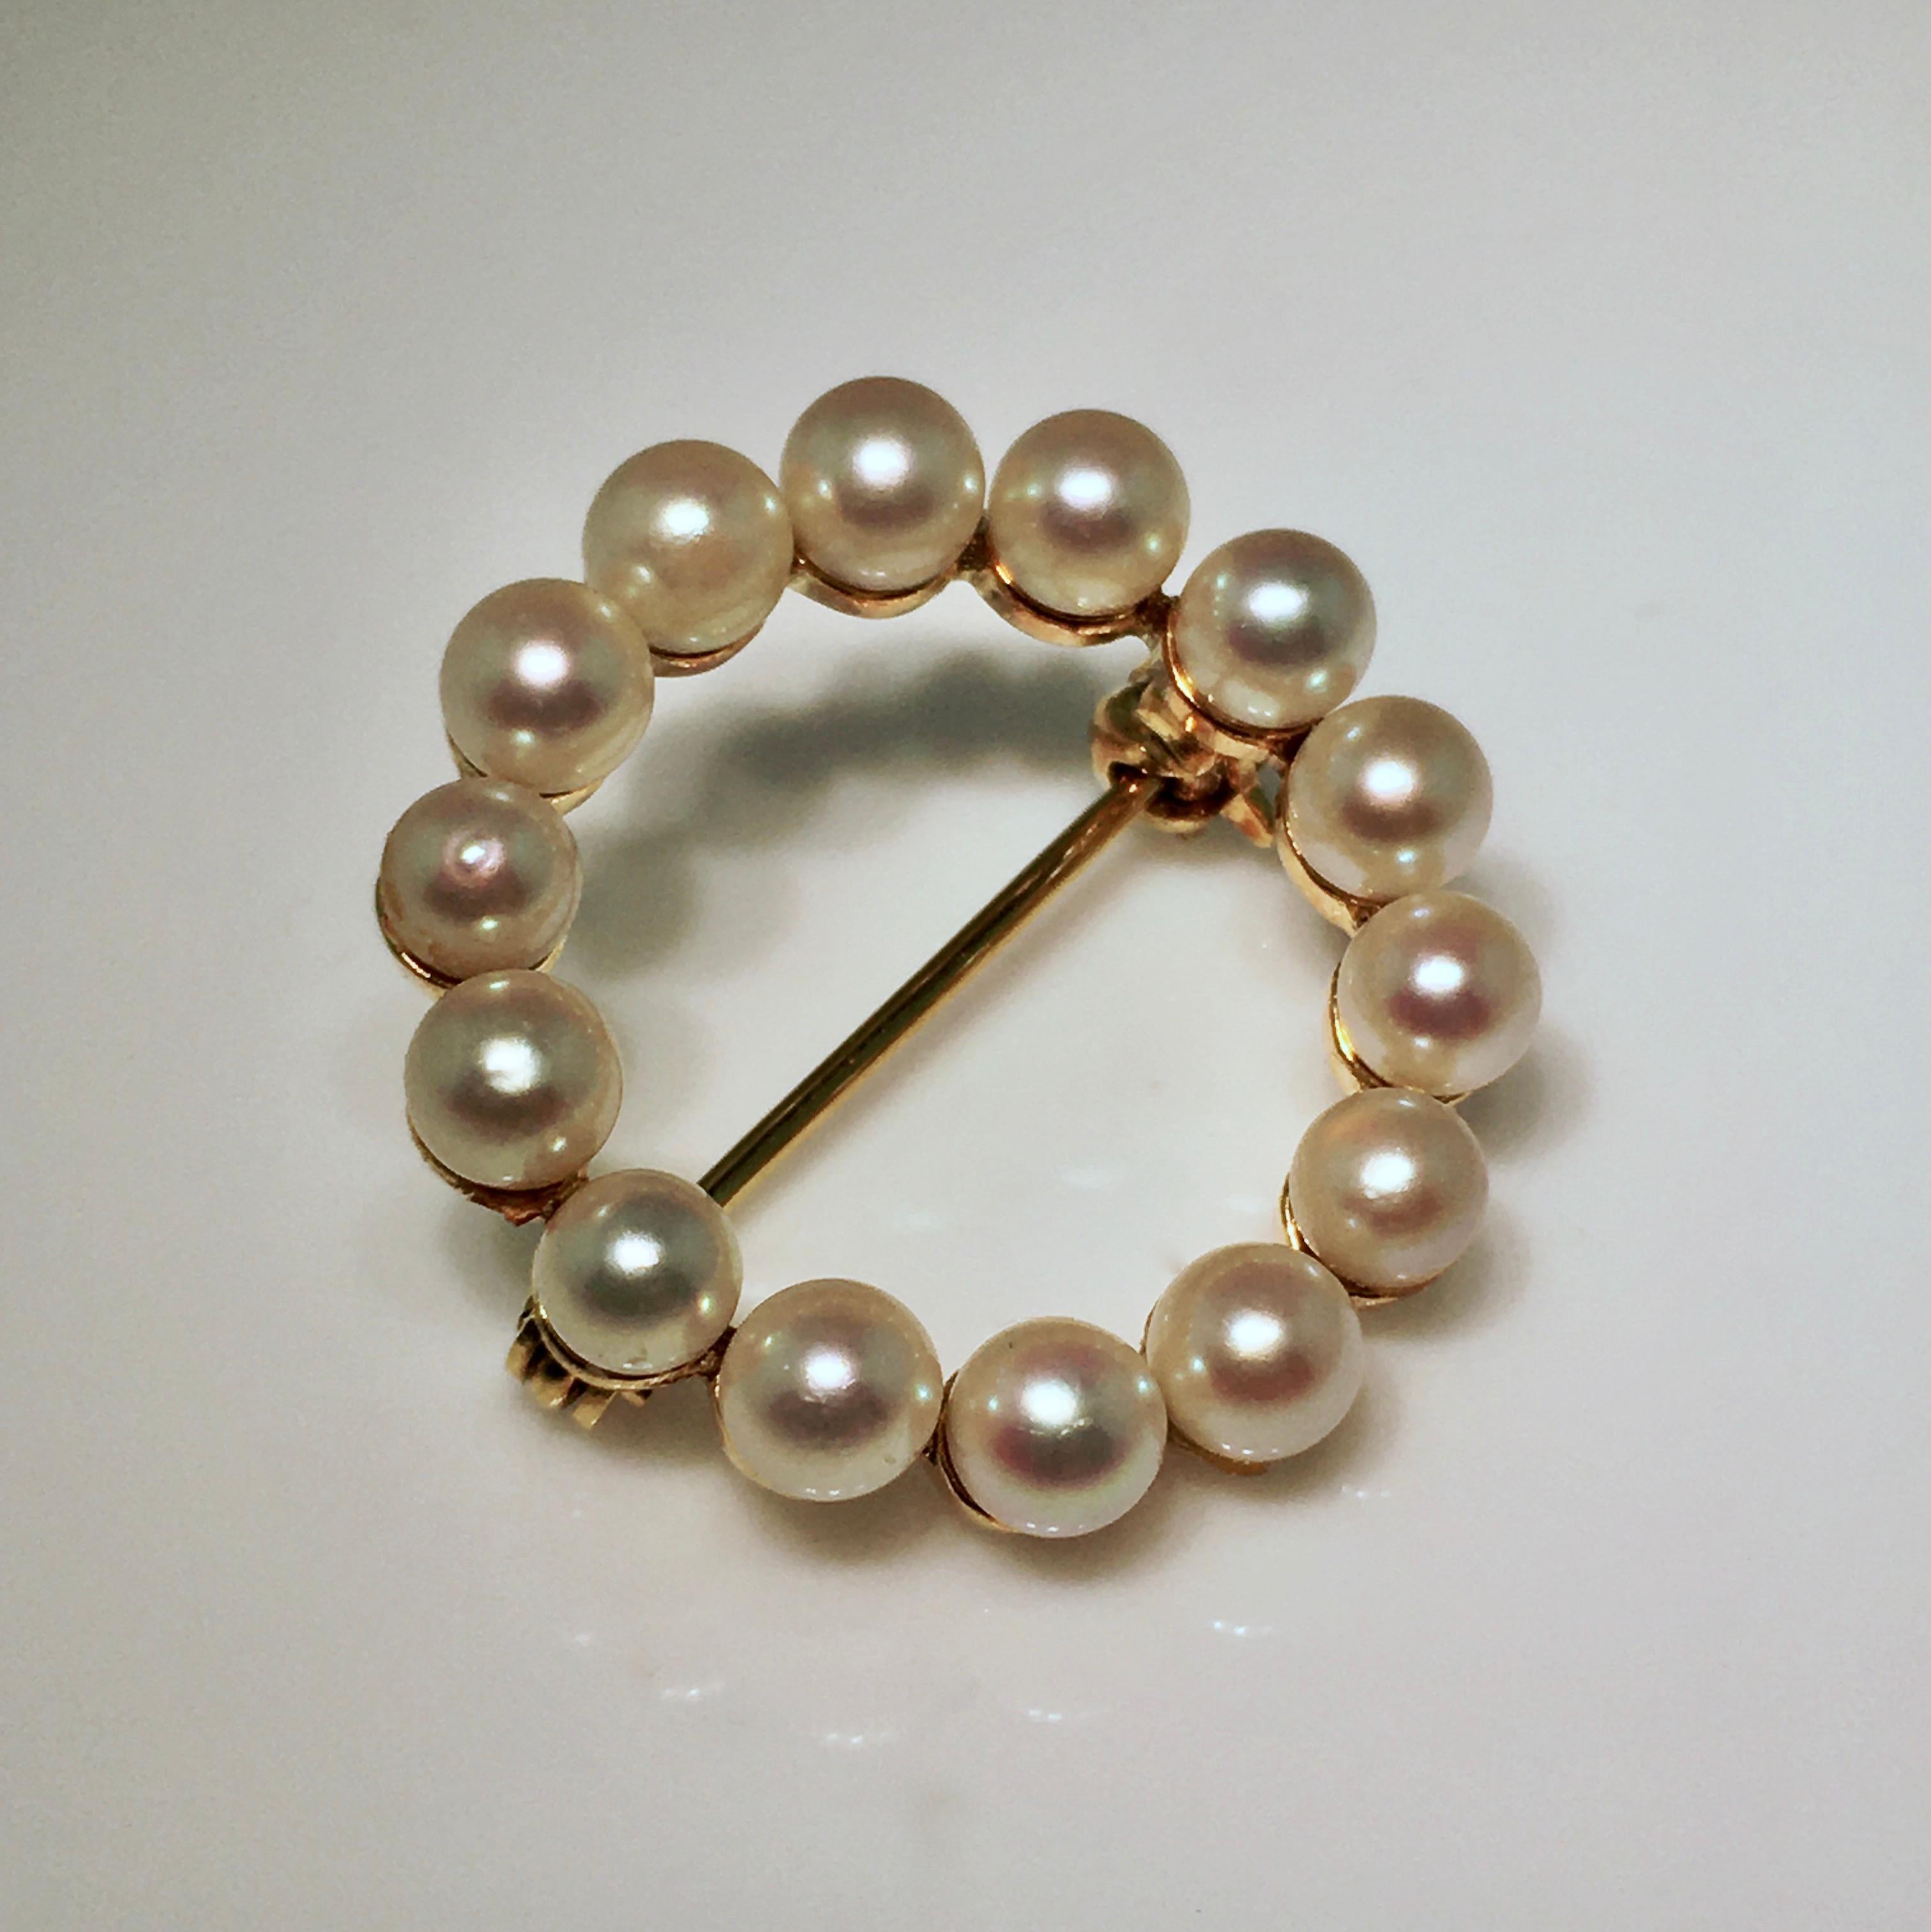 Miniature brooch, 14 carat yellow gold with Akoya pearls. These beautiful quality cultivated pearls have no beautiful silk sheen.
The circle-shaped brooches were very popular in the 1950s. The clothes from that time made it possible to wear the